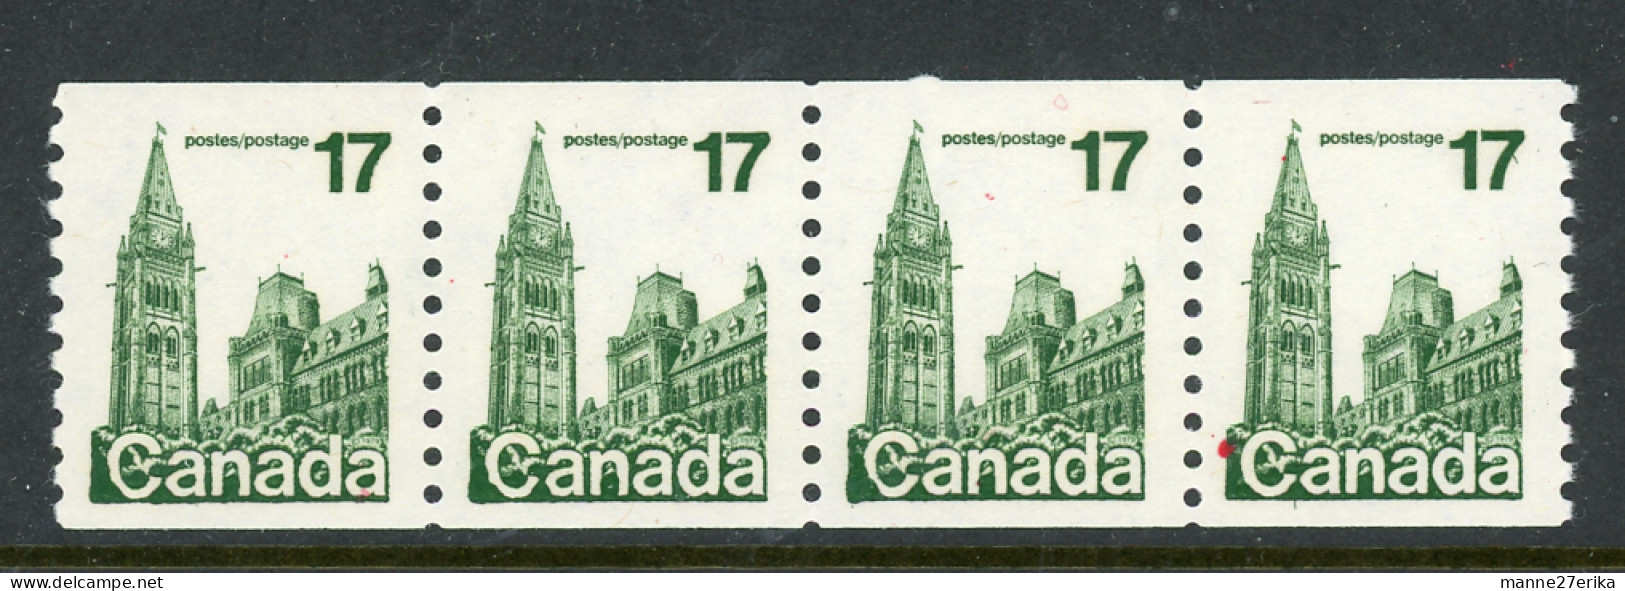 -Canada-1979- MNH (**) Definitive Coil Stamps "House Of Parliament" - Roulettes